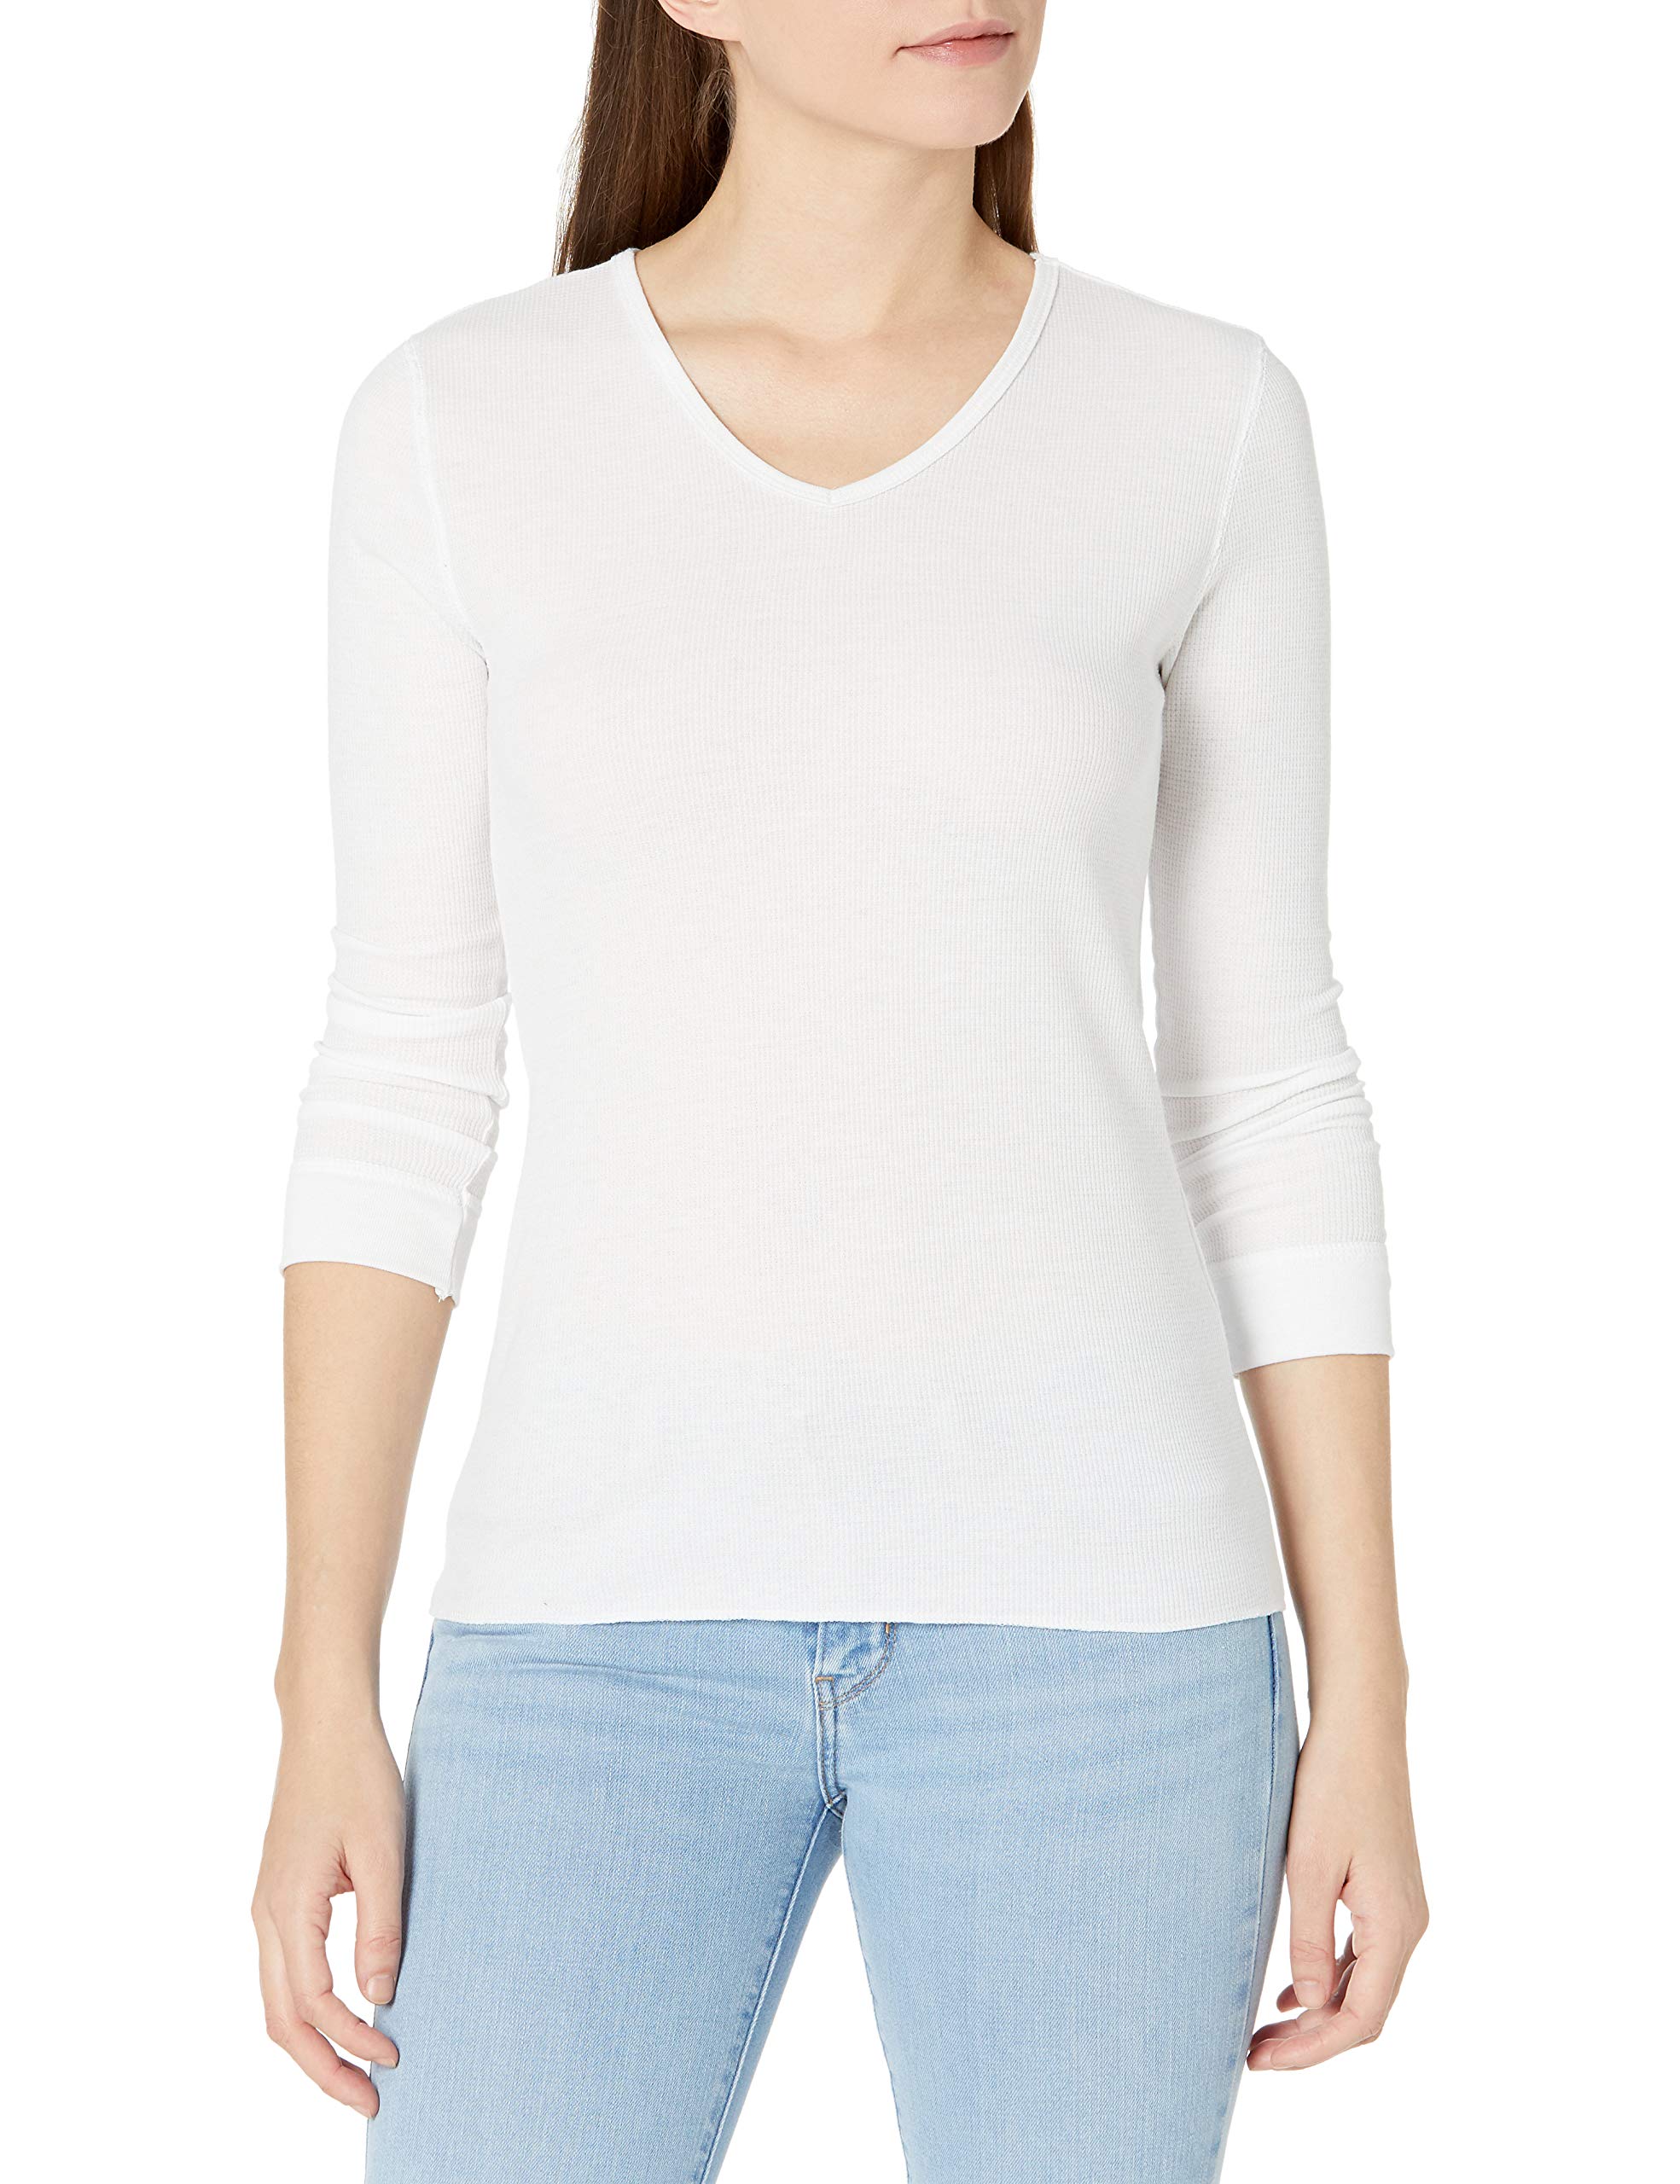 Fruit of the Loom Women's Micro Waffle Thermal V-Neck